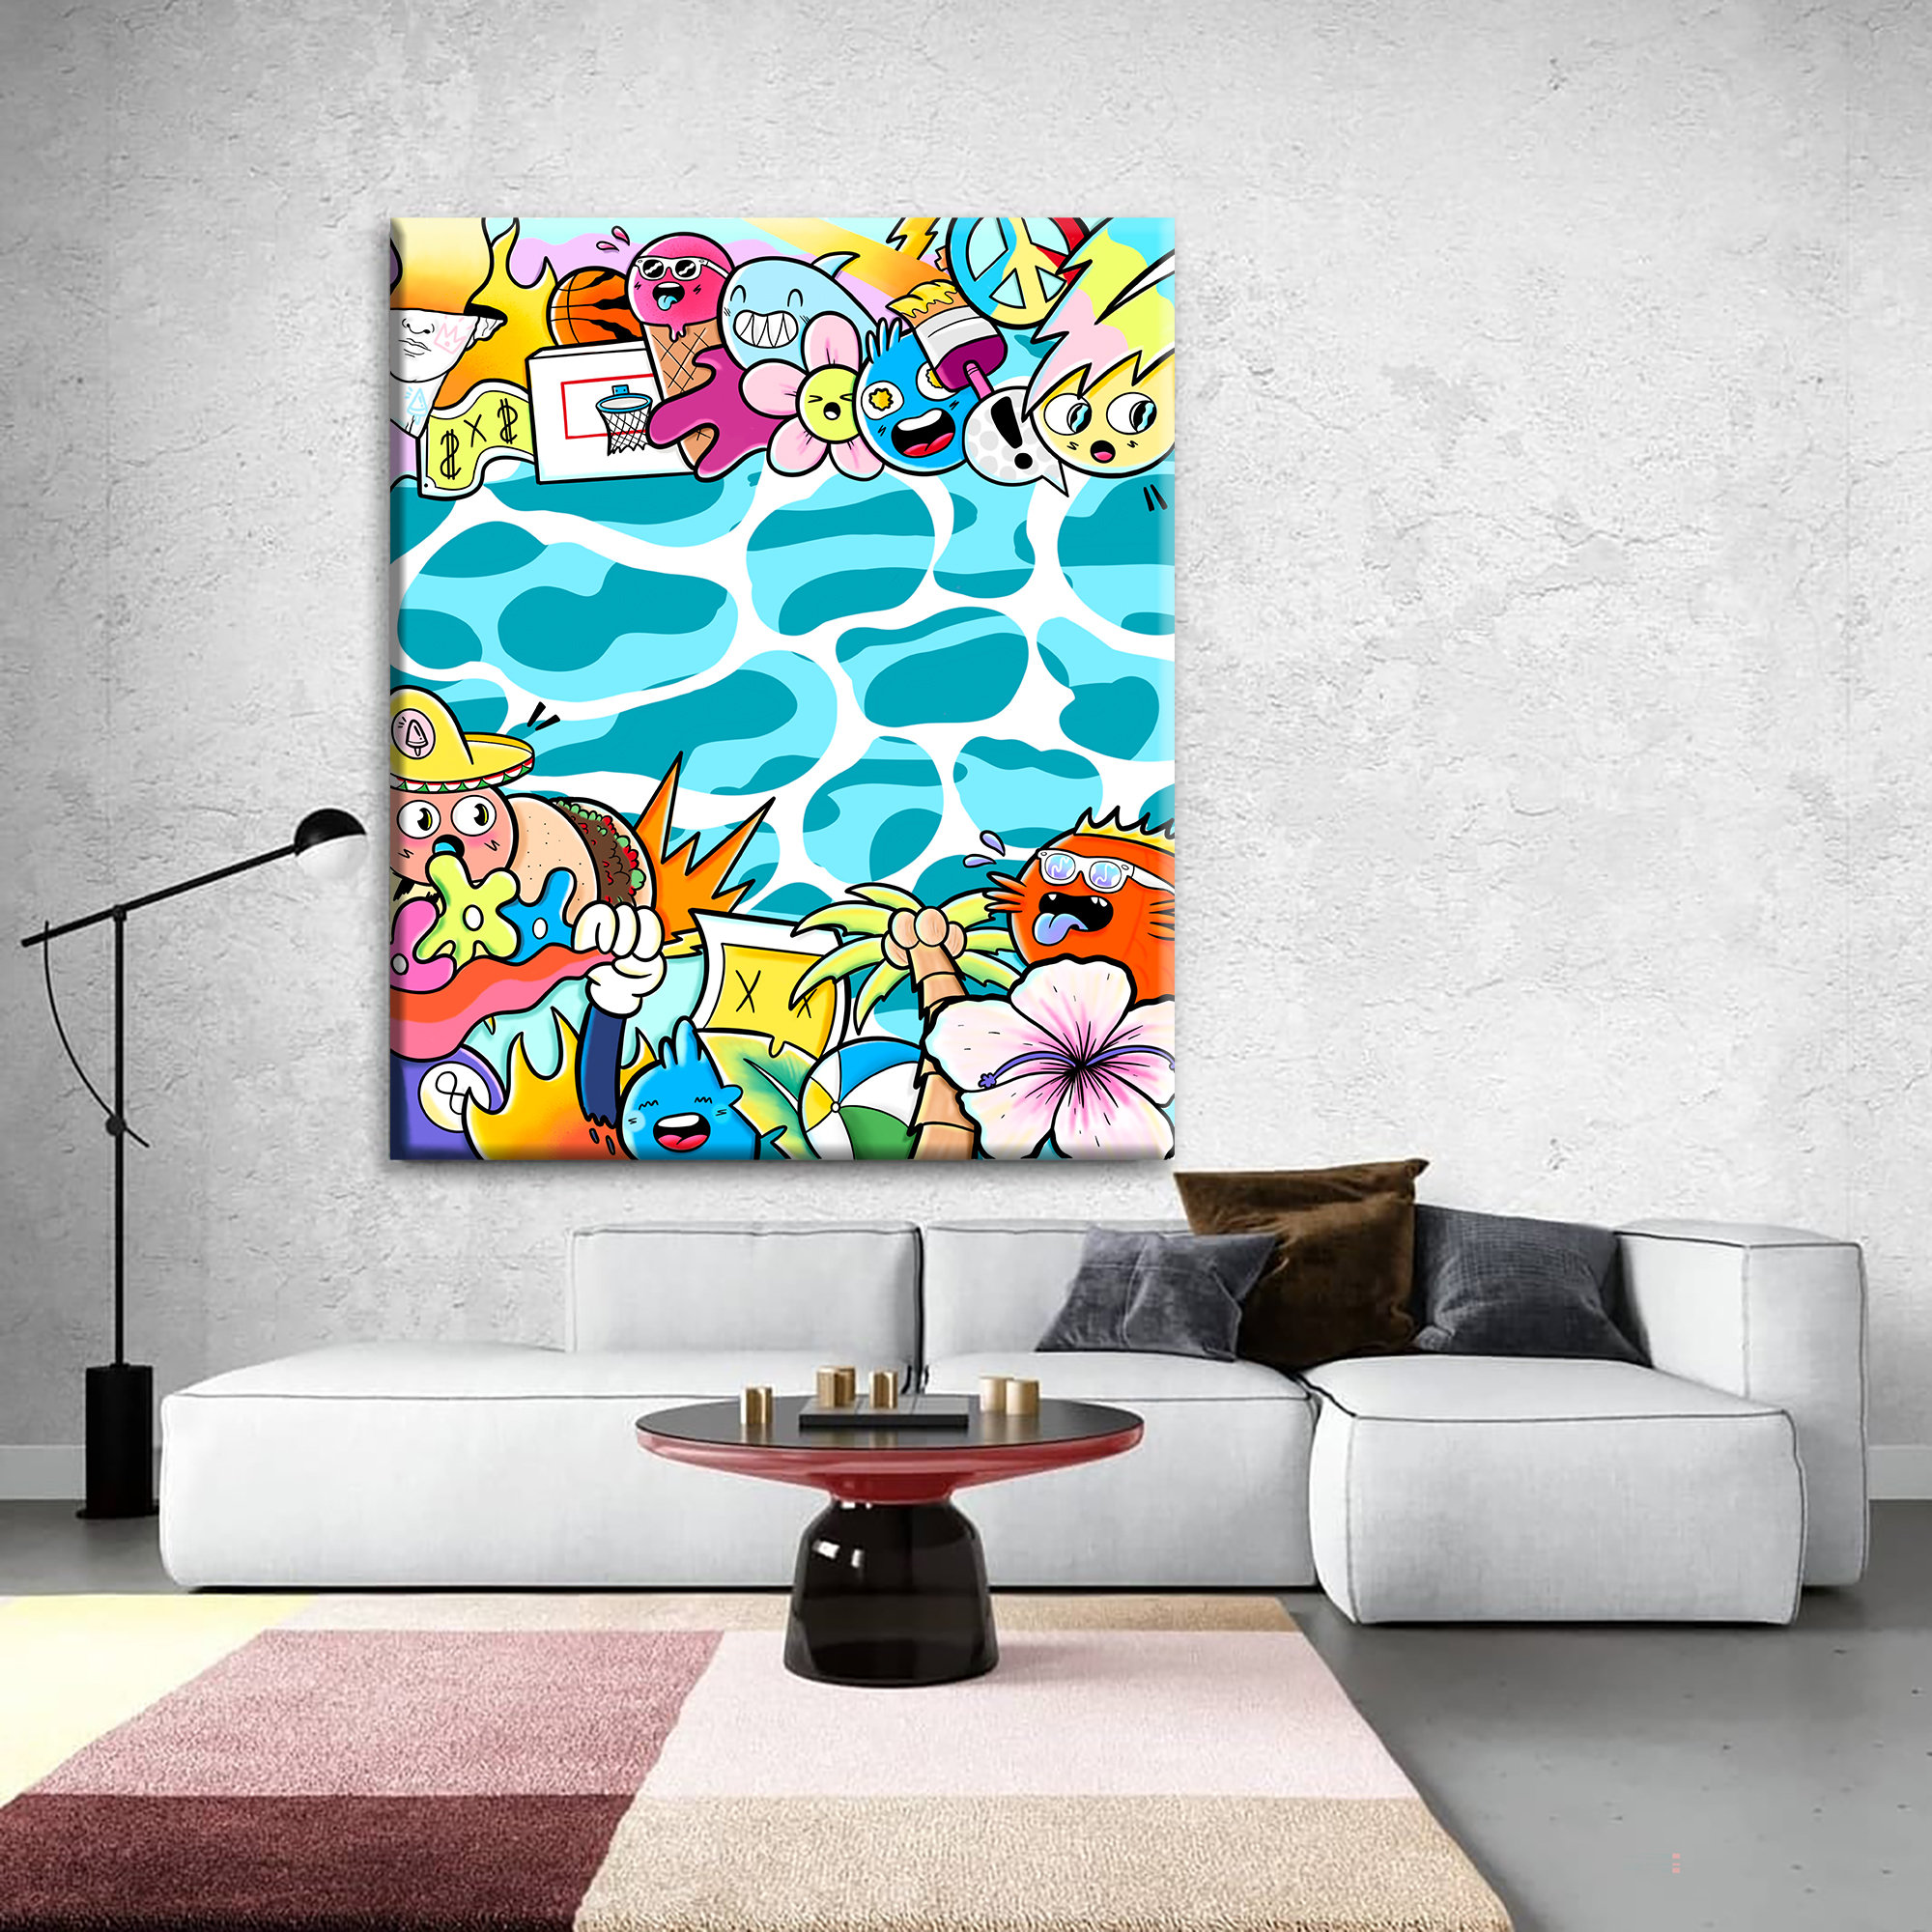 Large Vertical Graffiti Painting Living Room Wall Art Canvas 